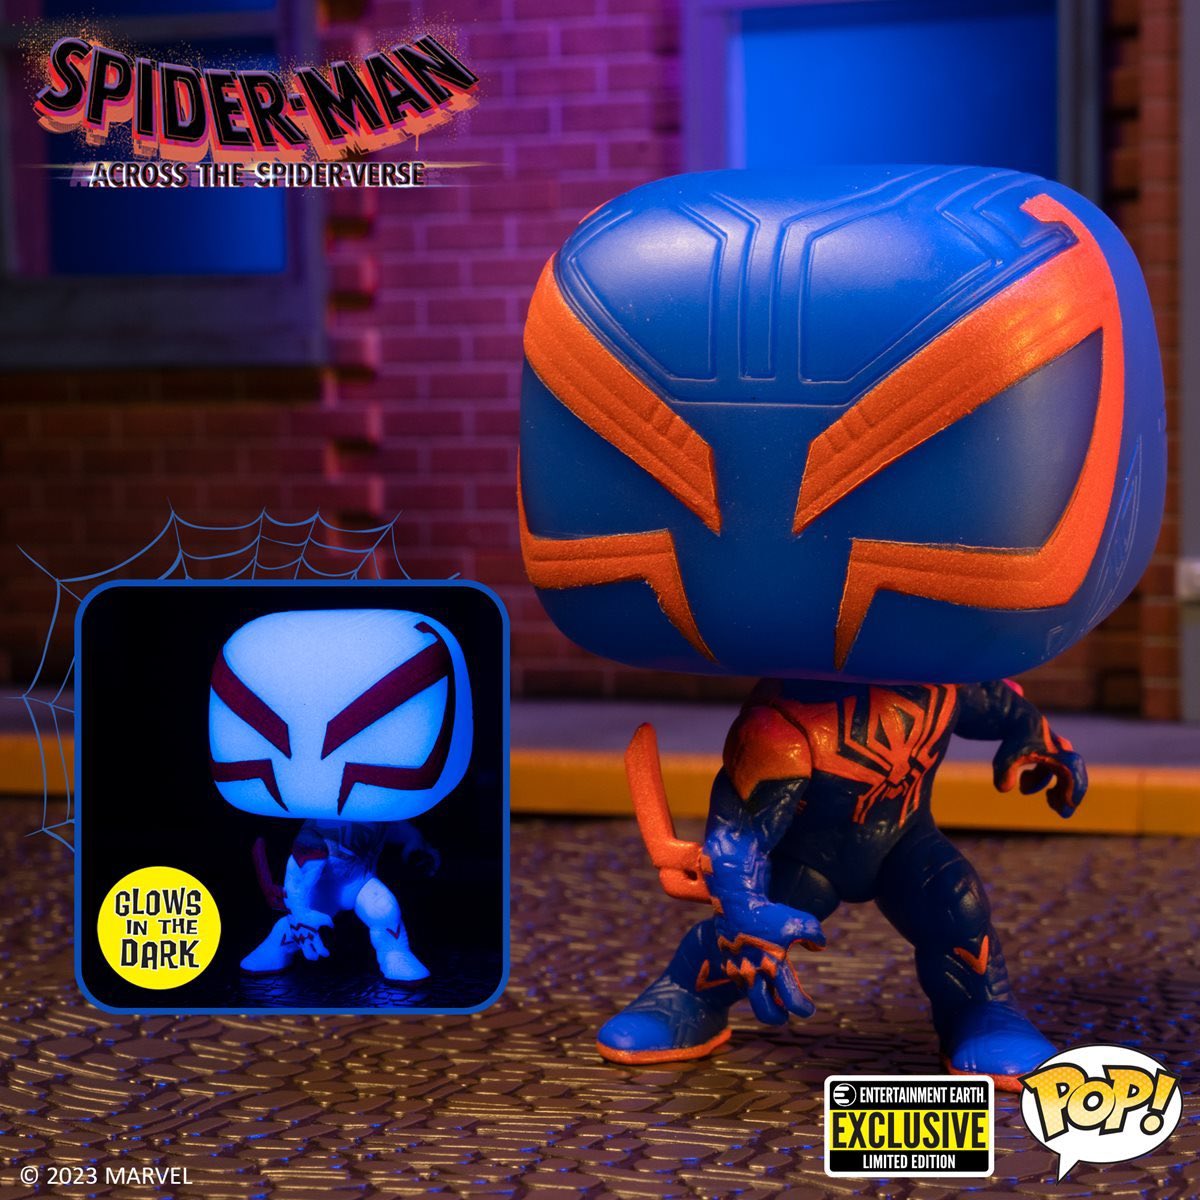 Giveaway #90, RT + Like + Follow for a chance to win the EE exclusive GitD Spider-Man 2099 Pop! Winner will be randomly chosen and announced on 6/14.

Pop Page ➡️ ee.toys/9GB5ZW

#Funko #FunkoPop #FunkoFamily #Marvel #SpiderMan #SpiderMan2099 #SpiderVerse